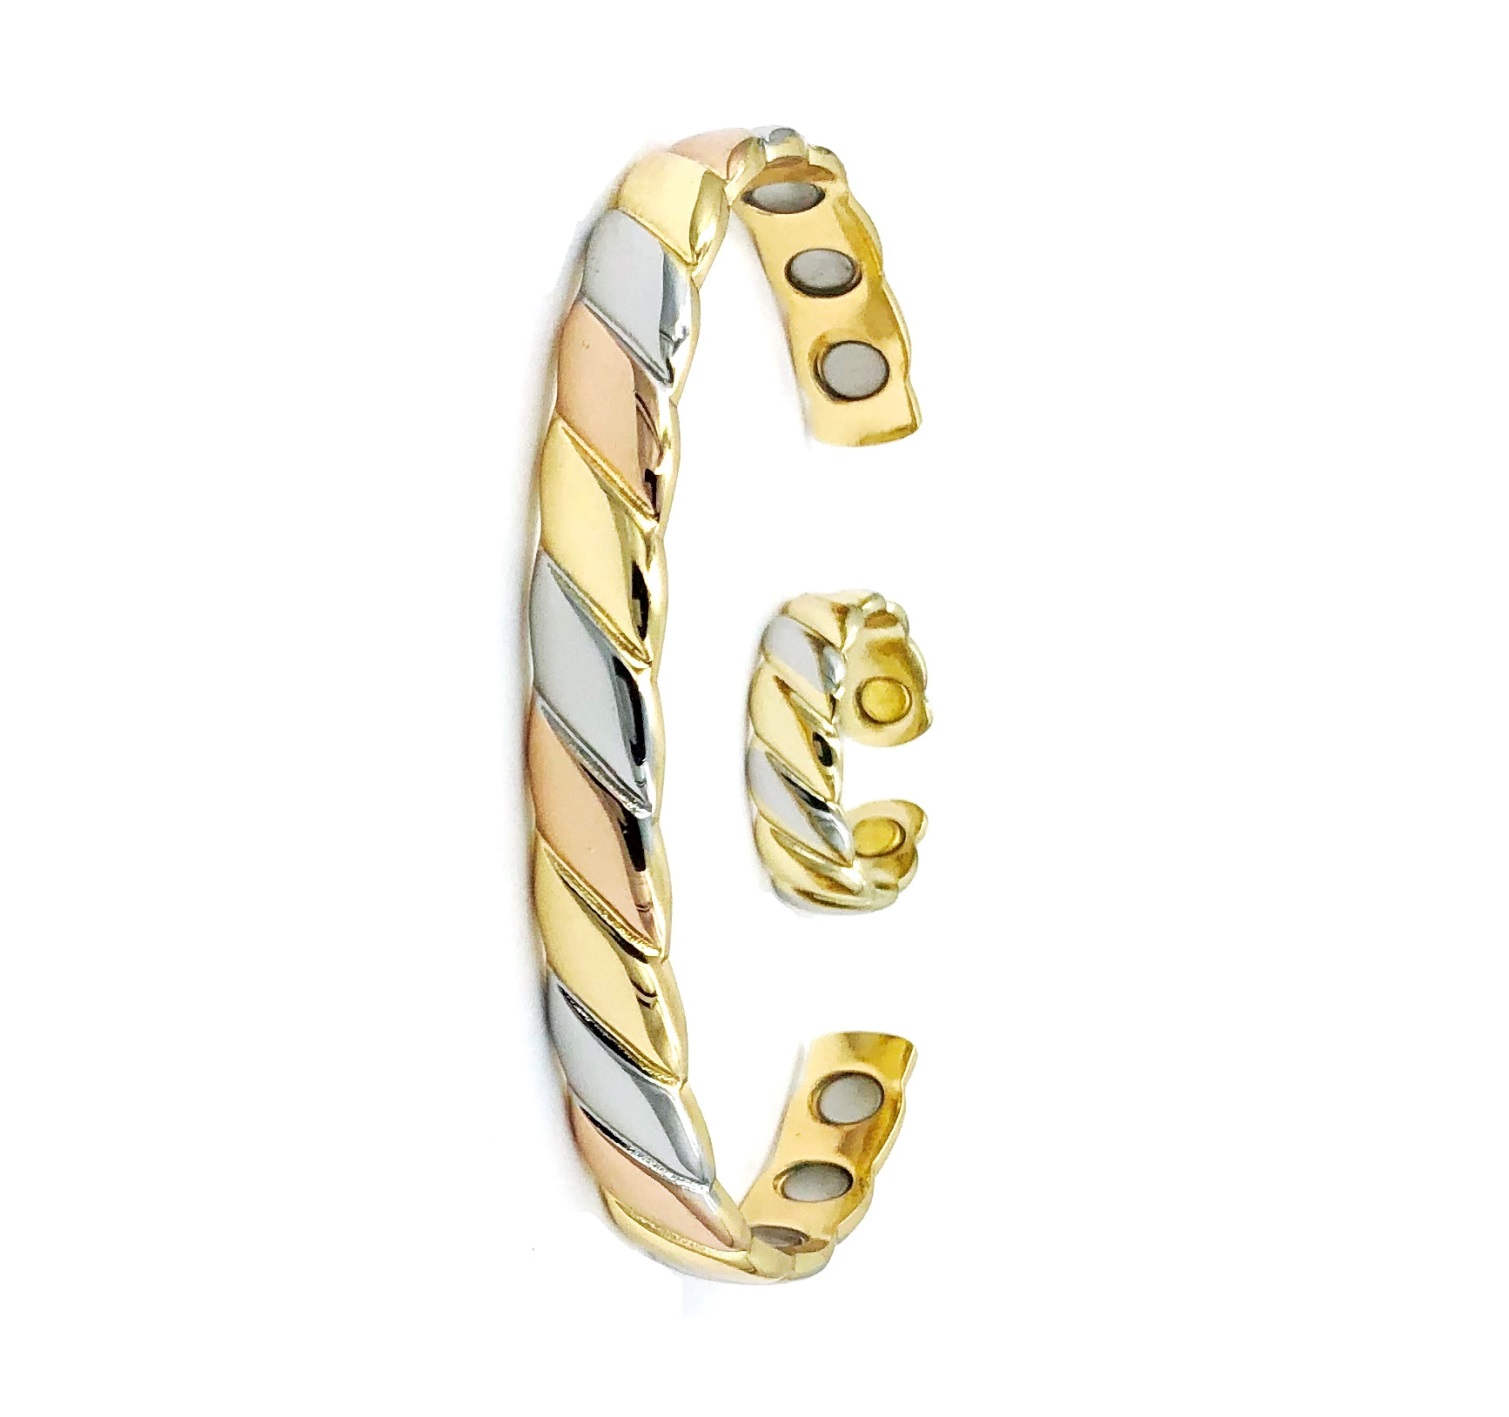 Multi Twist Magnetic Therapy Copper Bangle/Ring Set #MBGR014